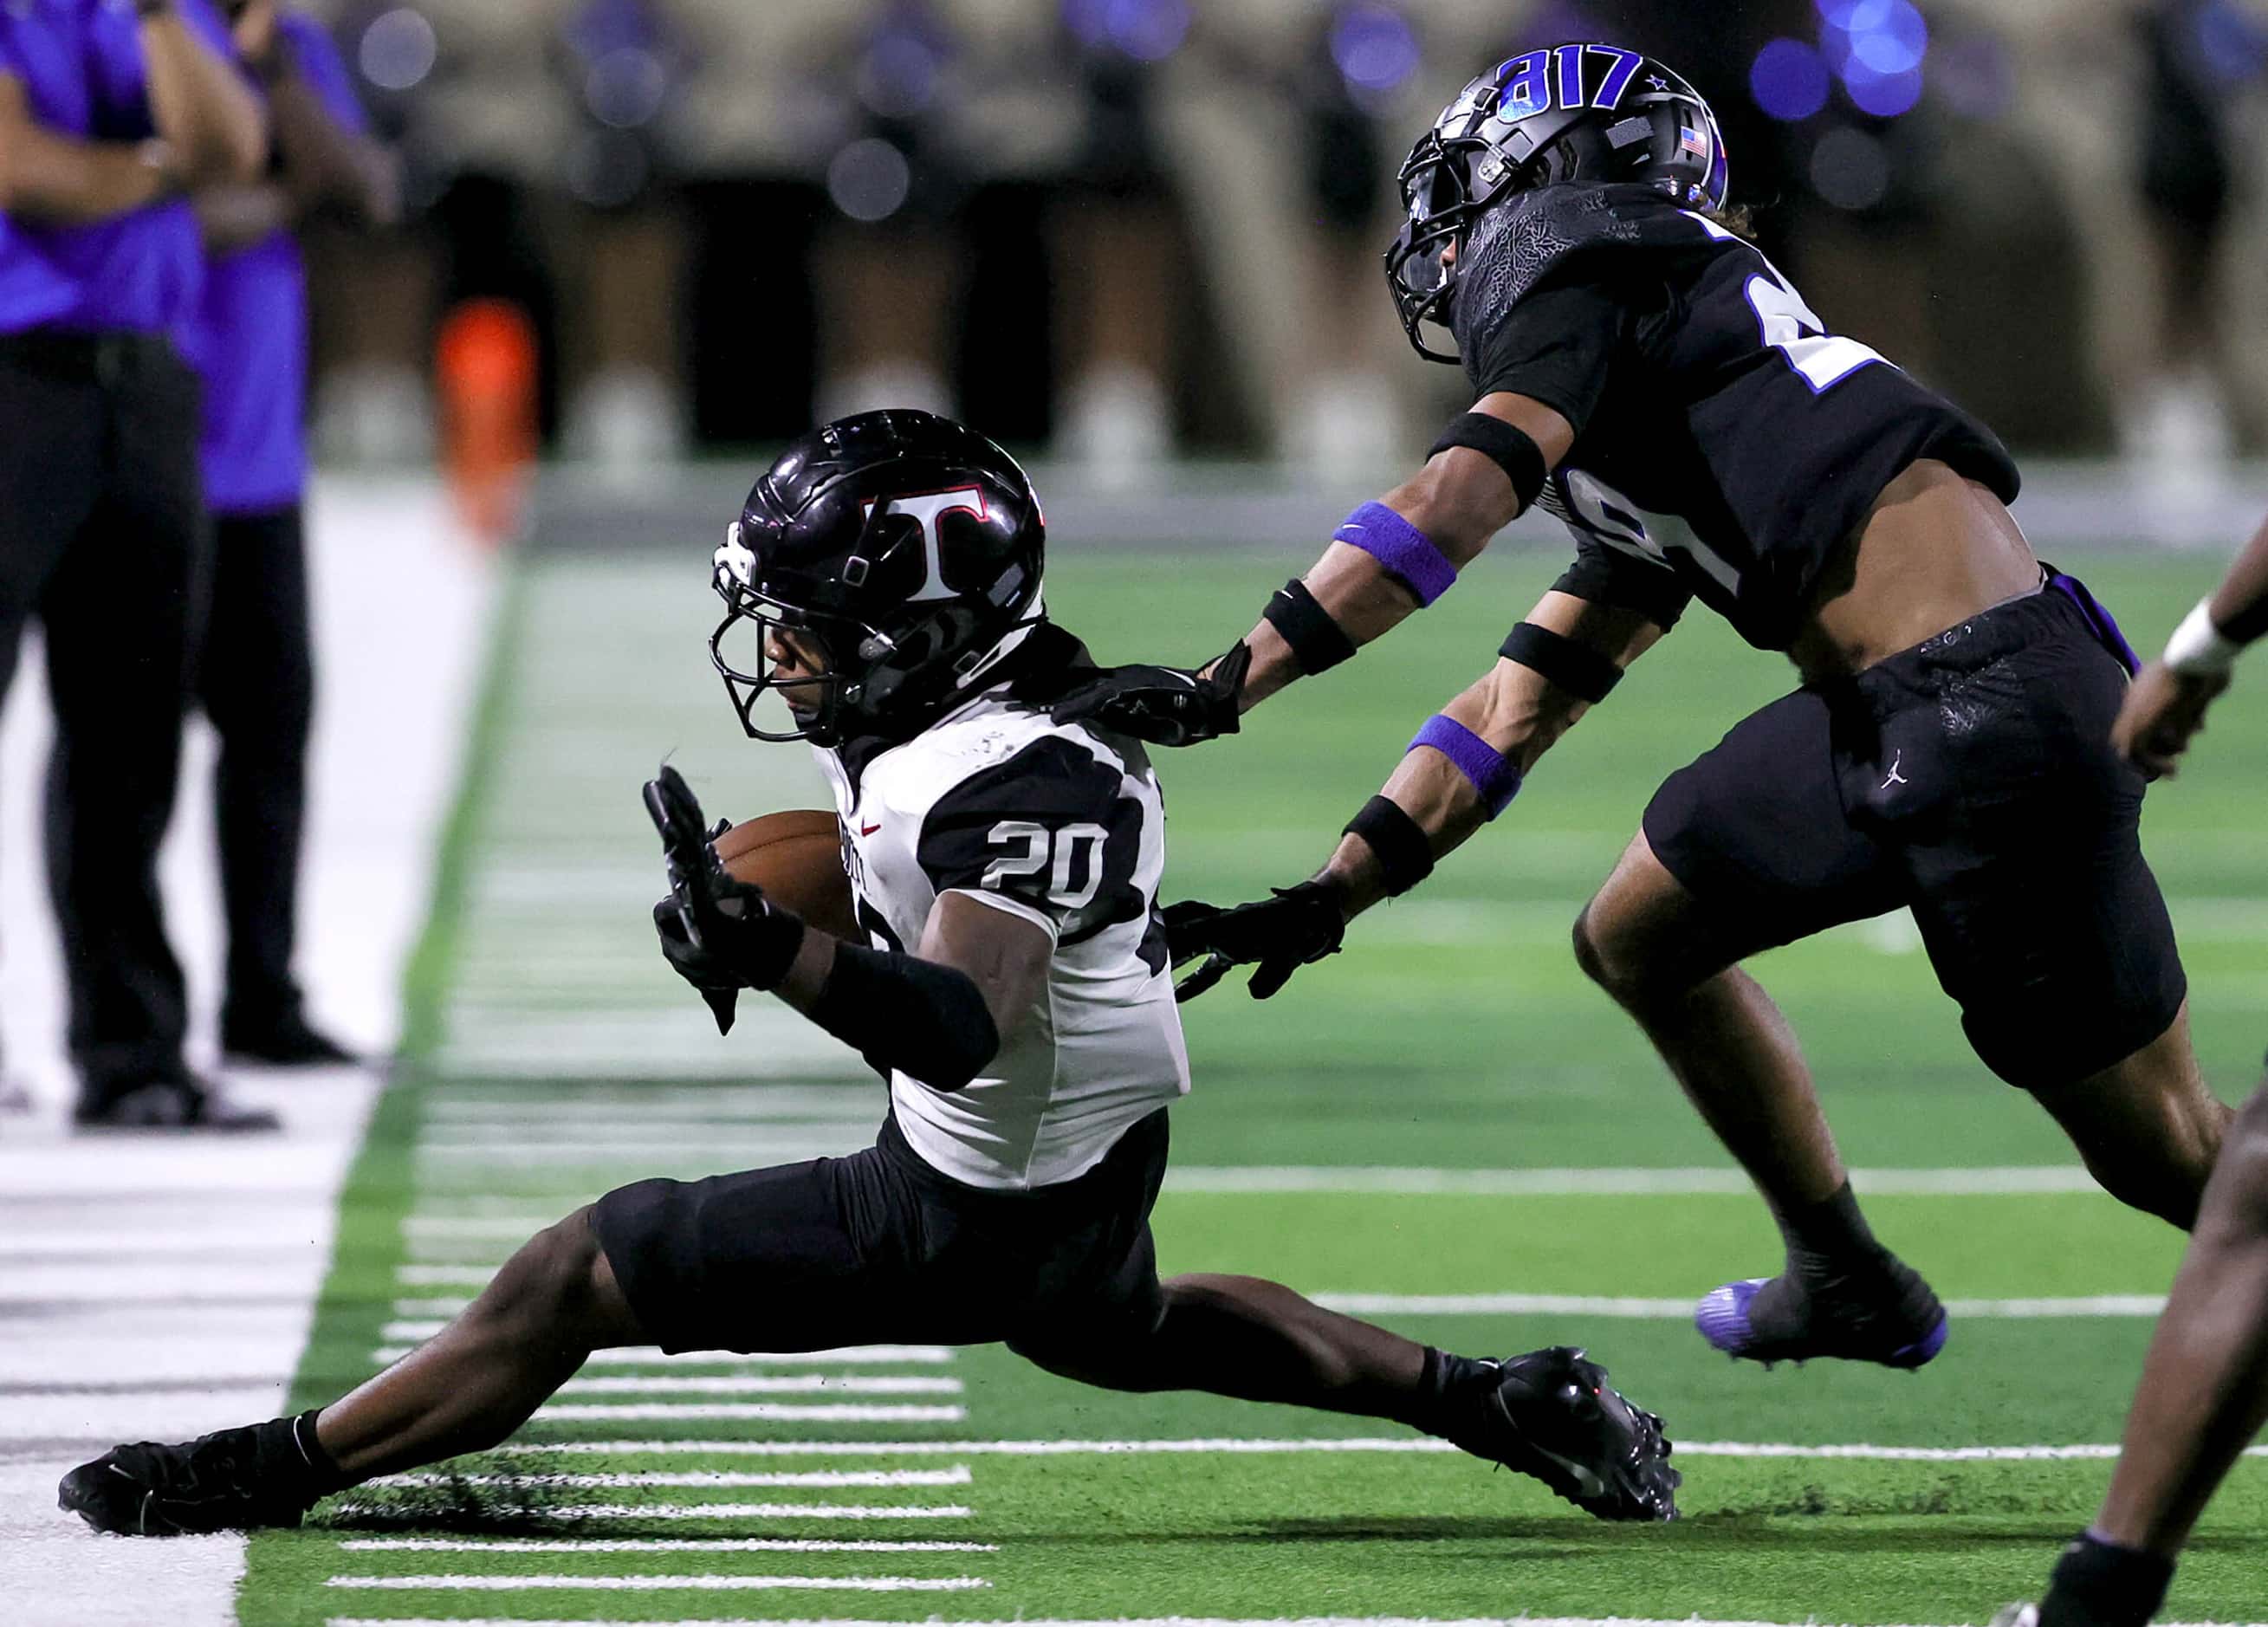 Euless Trinity running back Josh Bell (20) gets pushes out of bounds by North Crowley...